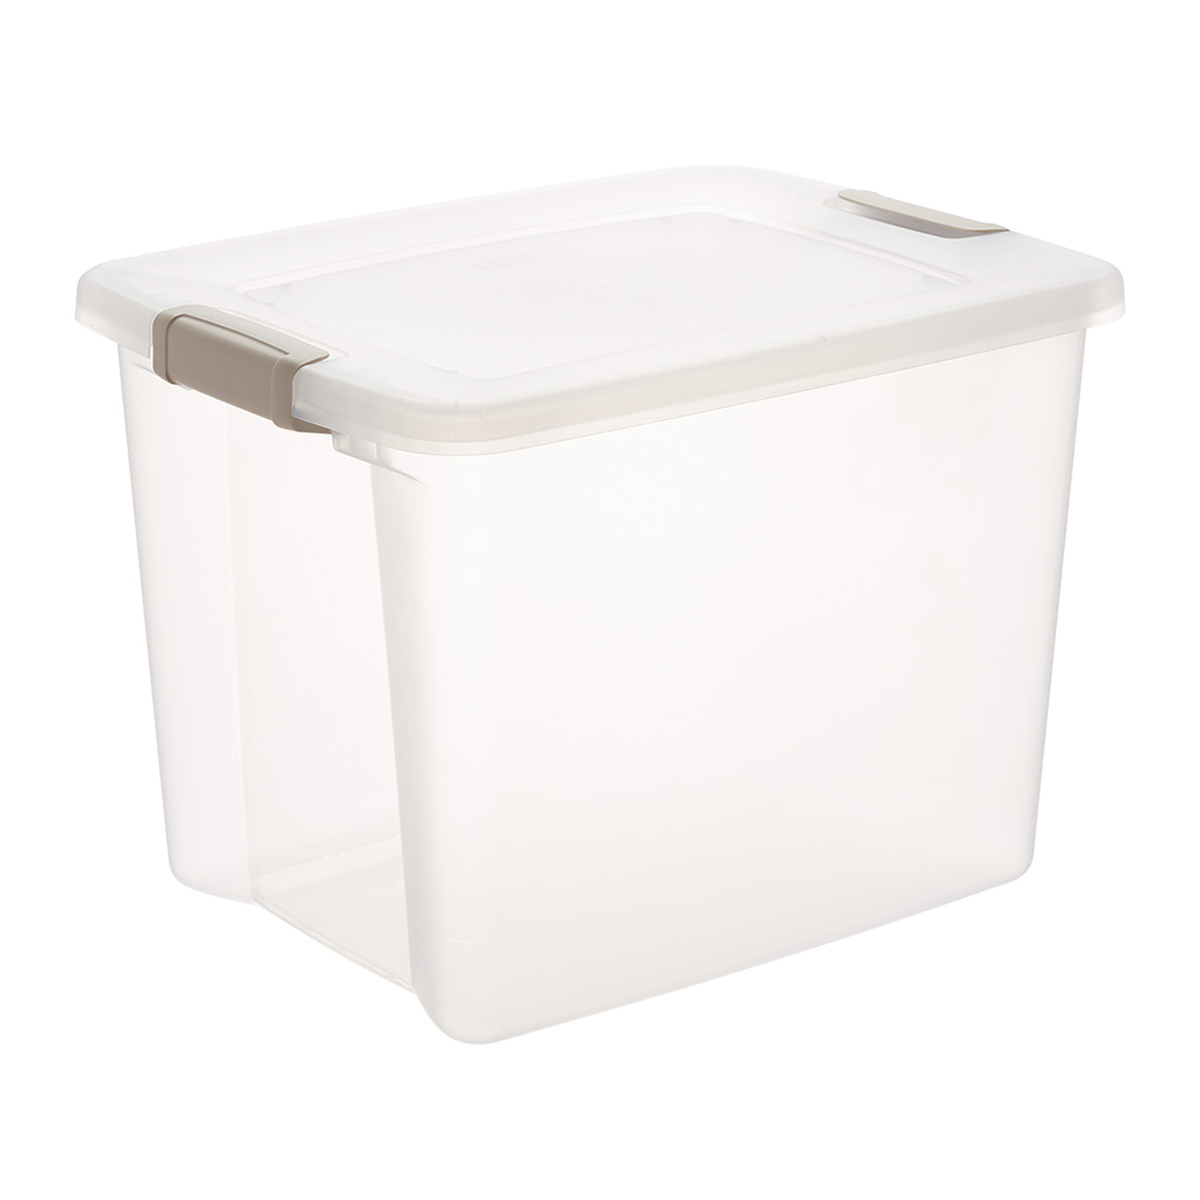 https://www.containerstore.com/catalogimages/365780/10048969-garage-tote-50qt.jpg